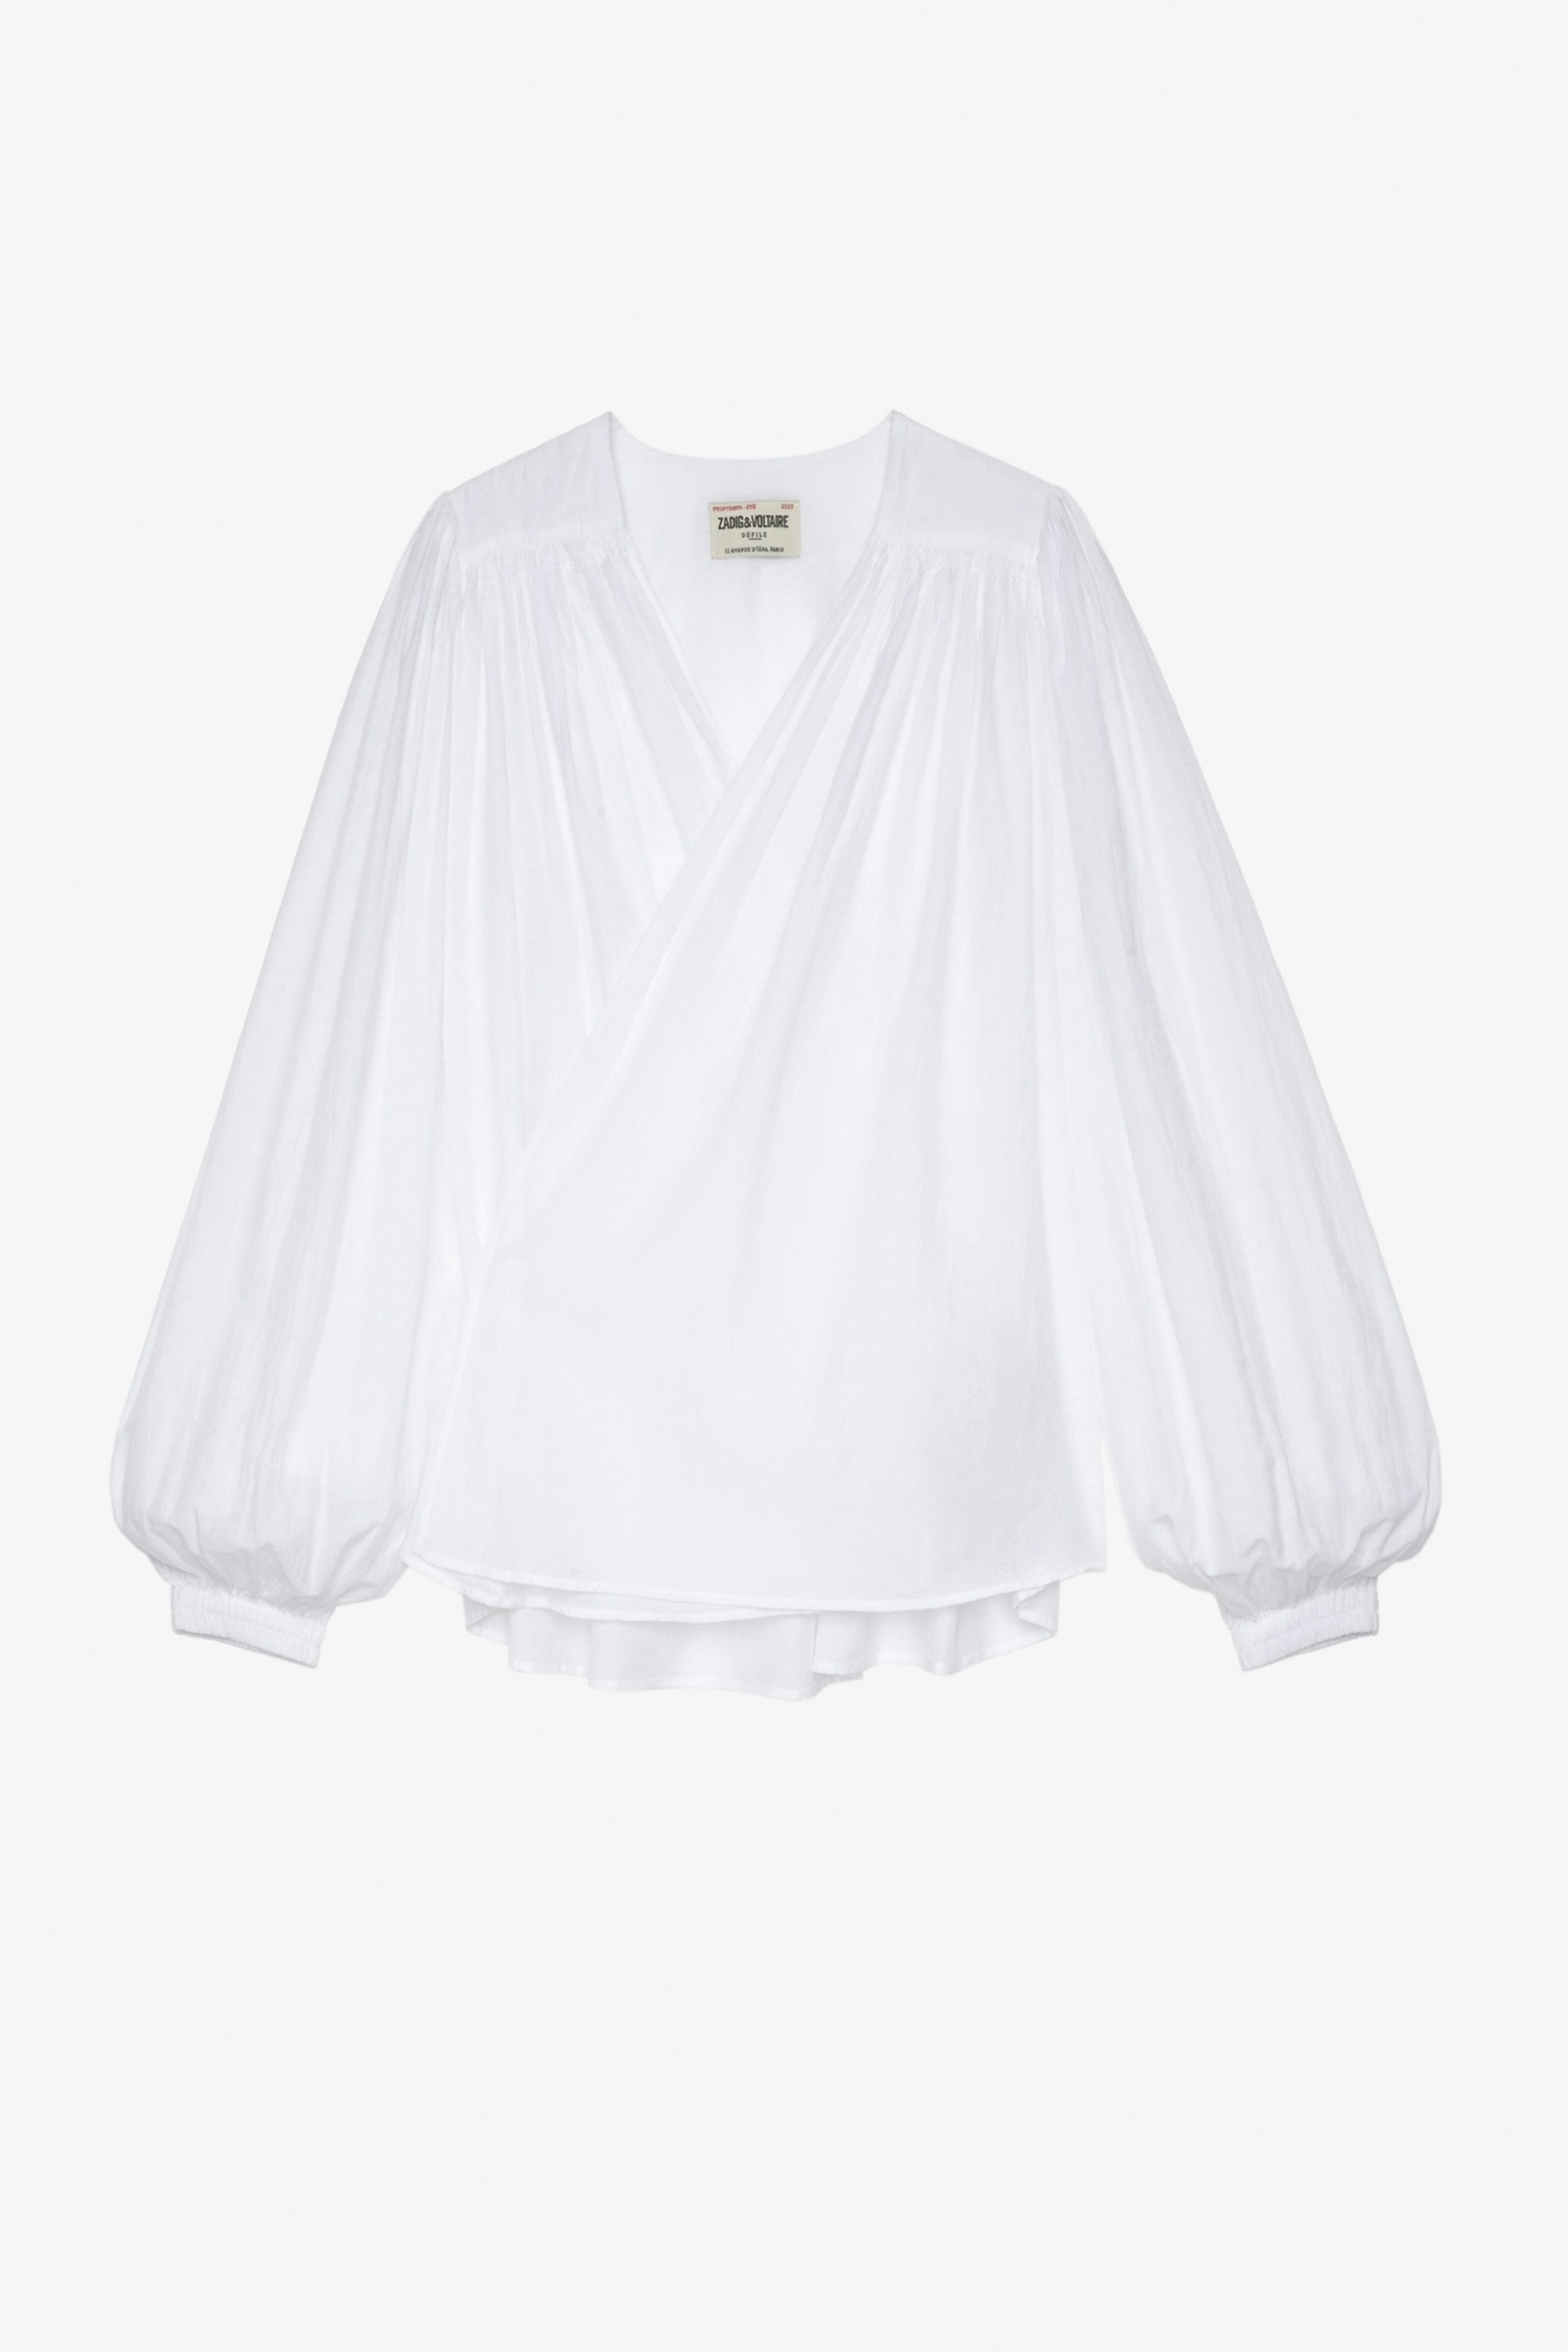 Tenew Shirt - Women's off-white knotted wrapover shirt